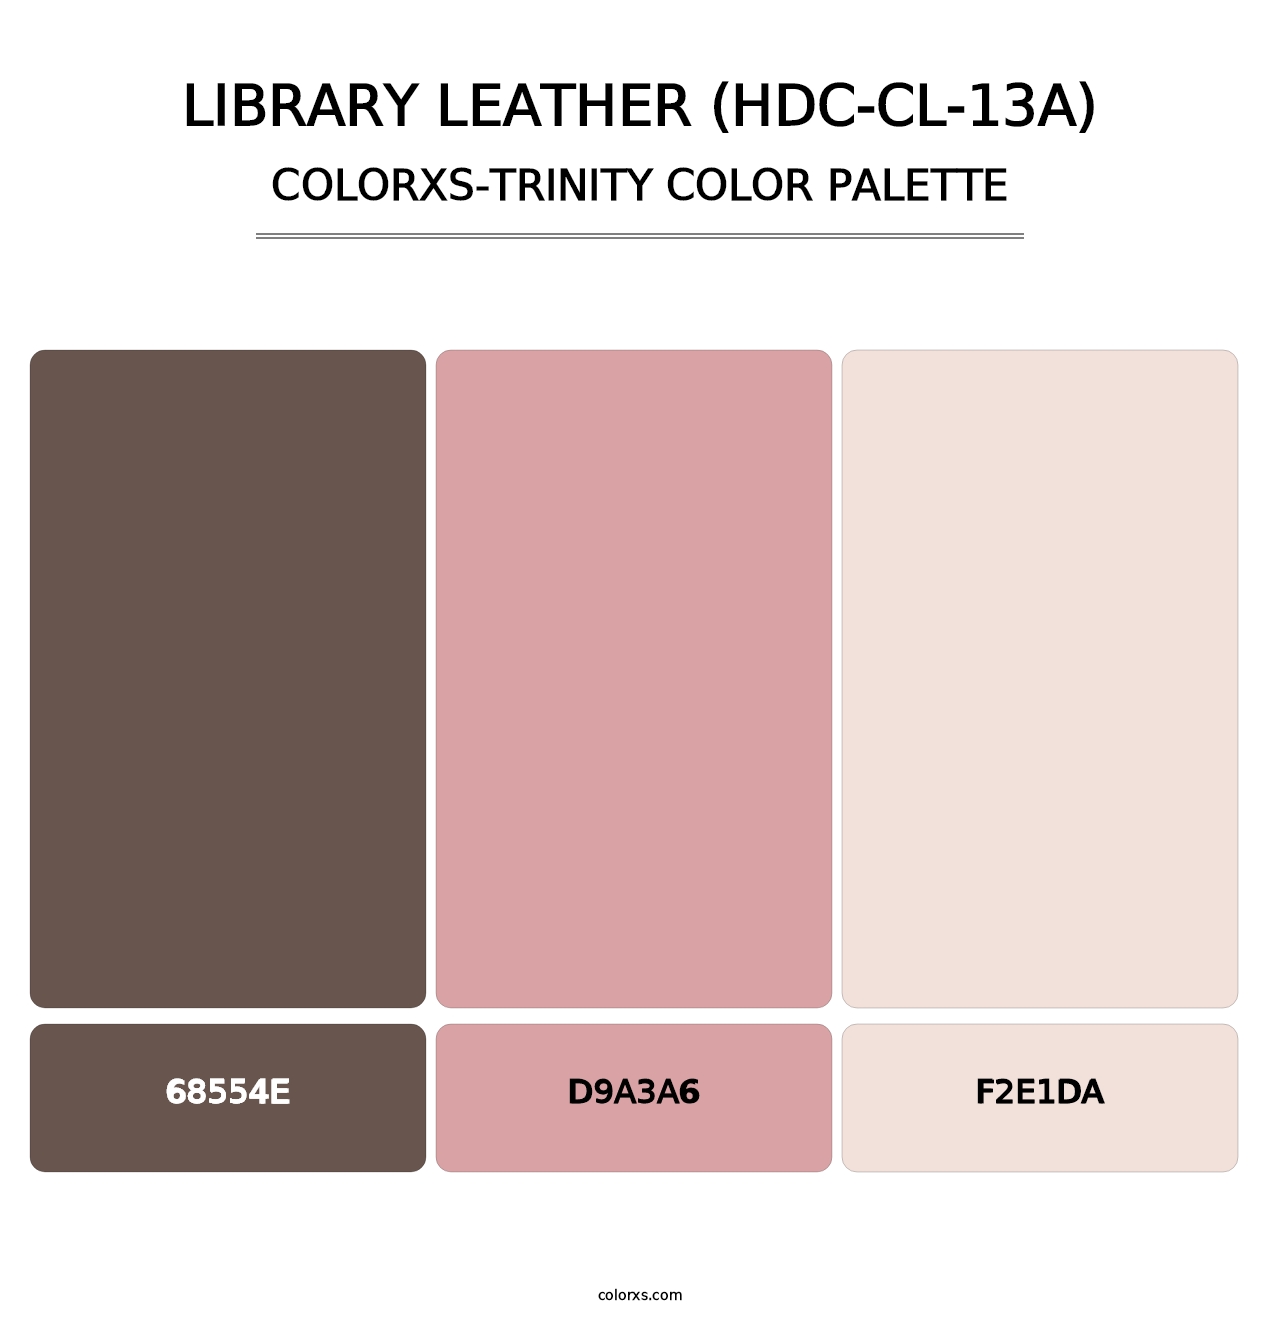 Library Leather (HDC-CL-13A) - Colorxs Trinity Palette